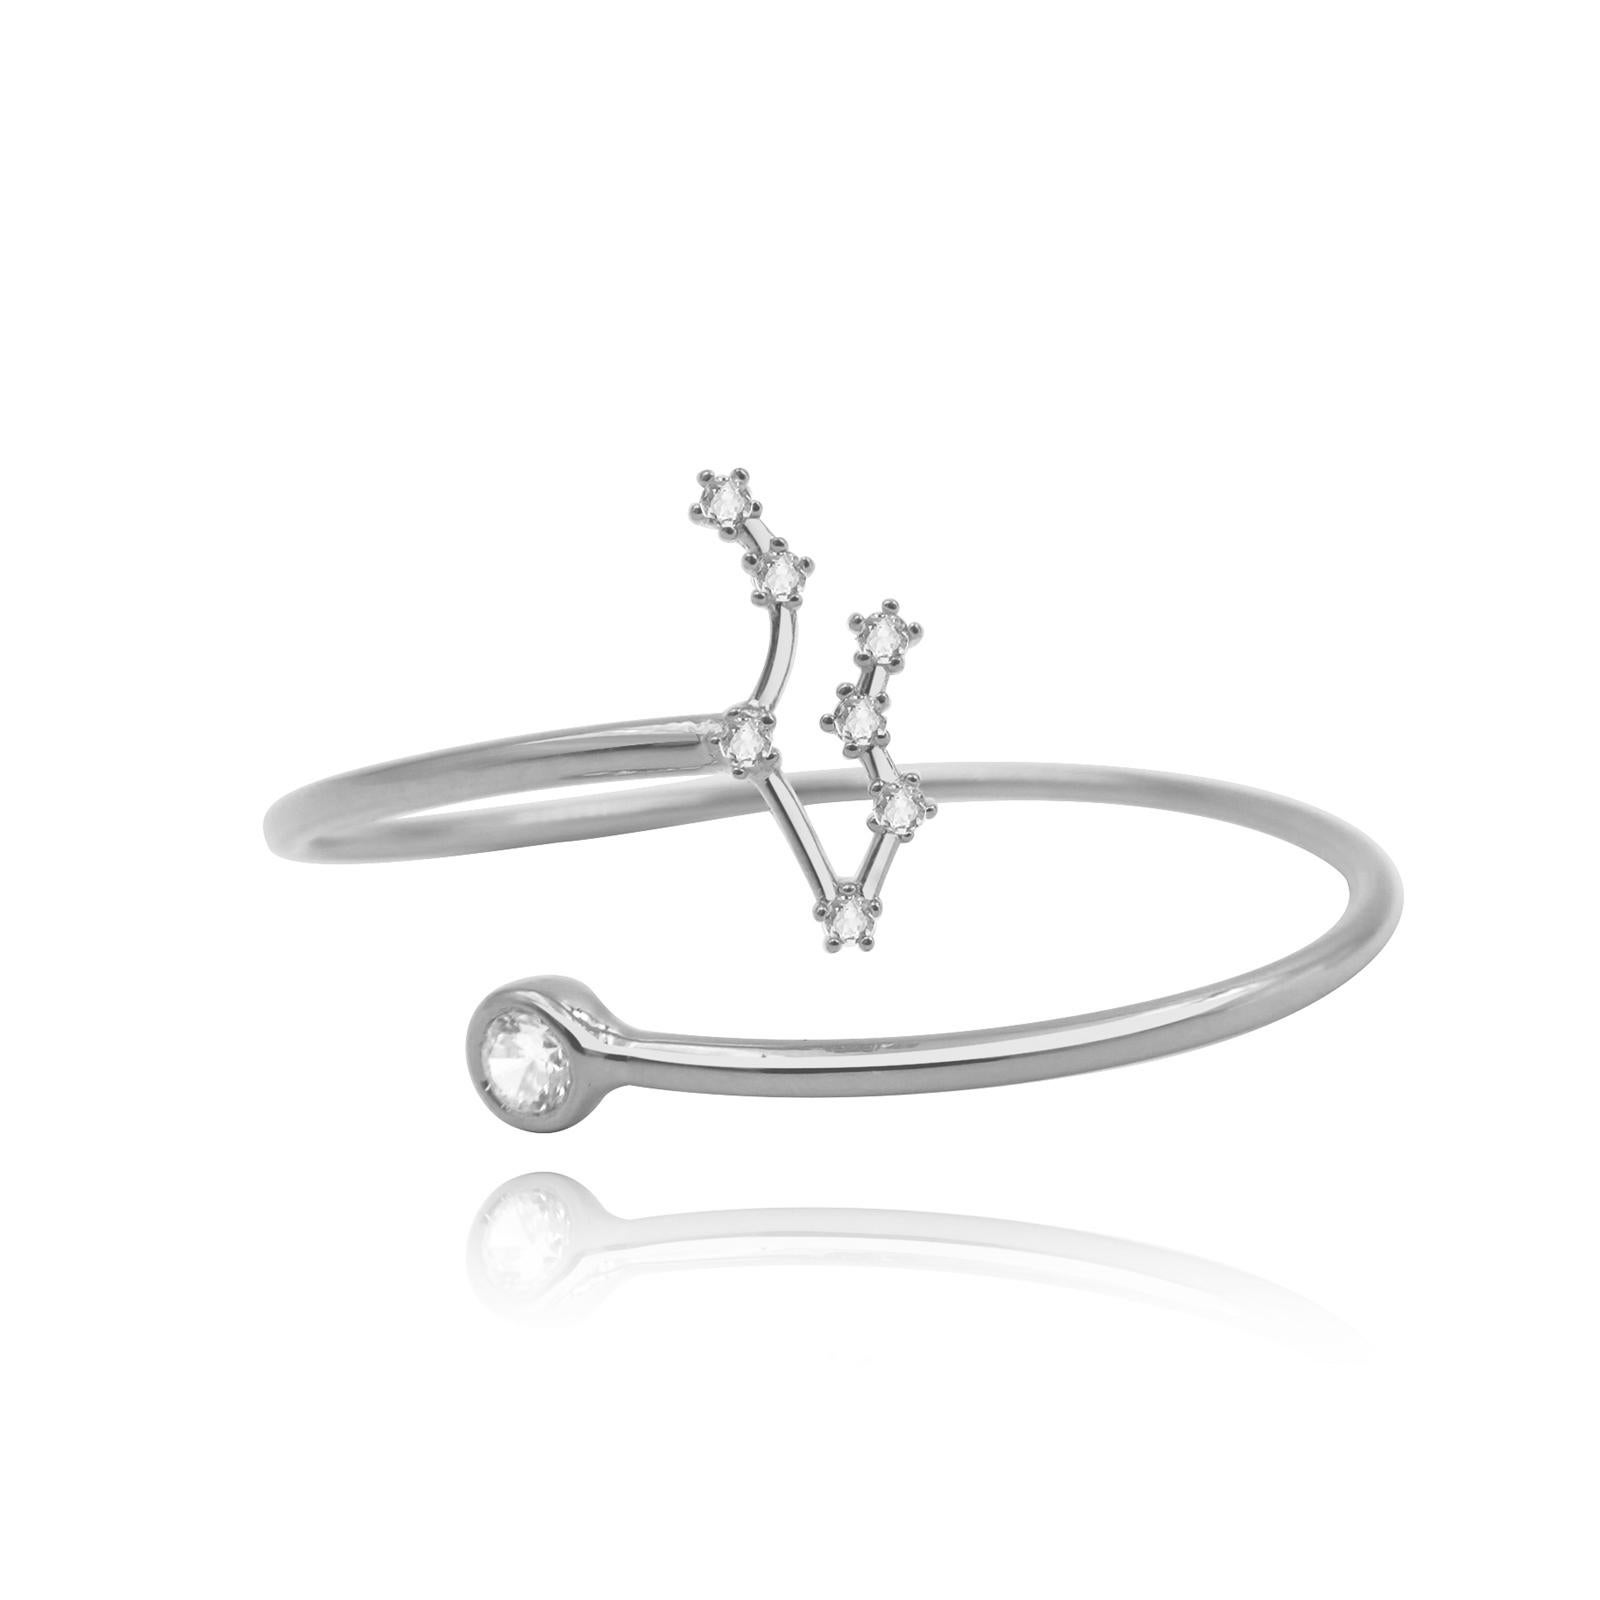 You are unique and your zodiac tells part of your story.  How your zodiac is displayed in the beautiful nighttime sky is what we want you to carry with you always. This gemini constellation wire bezel cuff shares a part of your personality with us